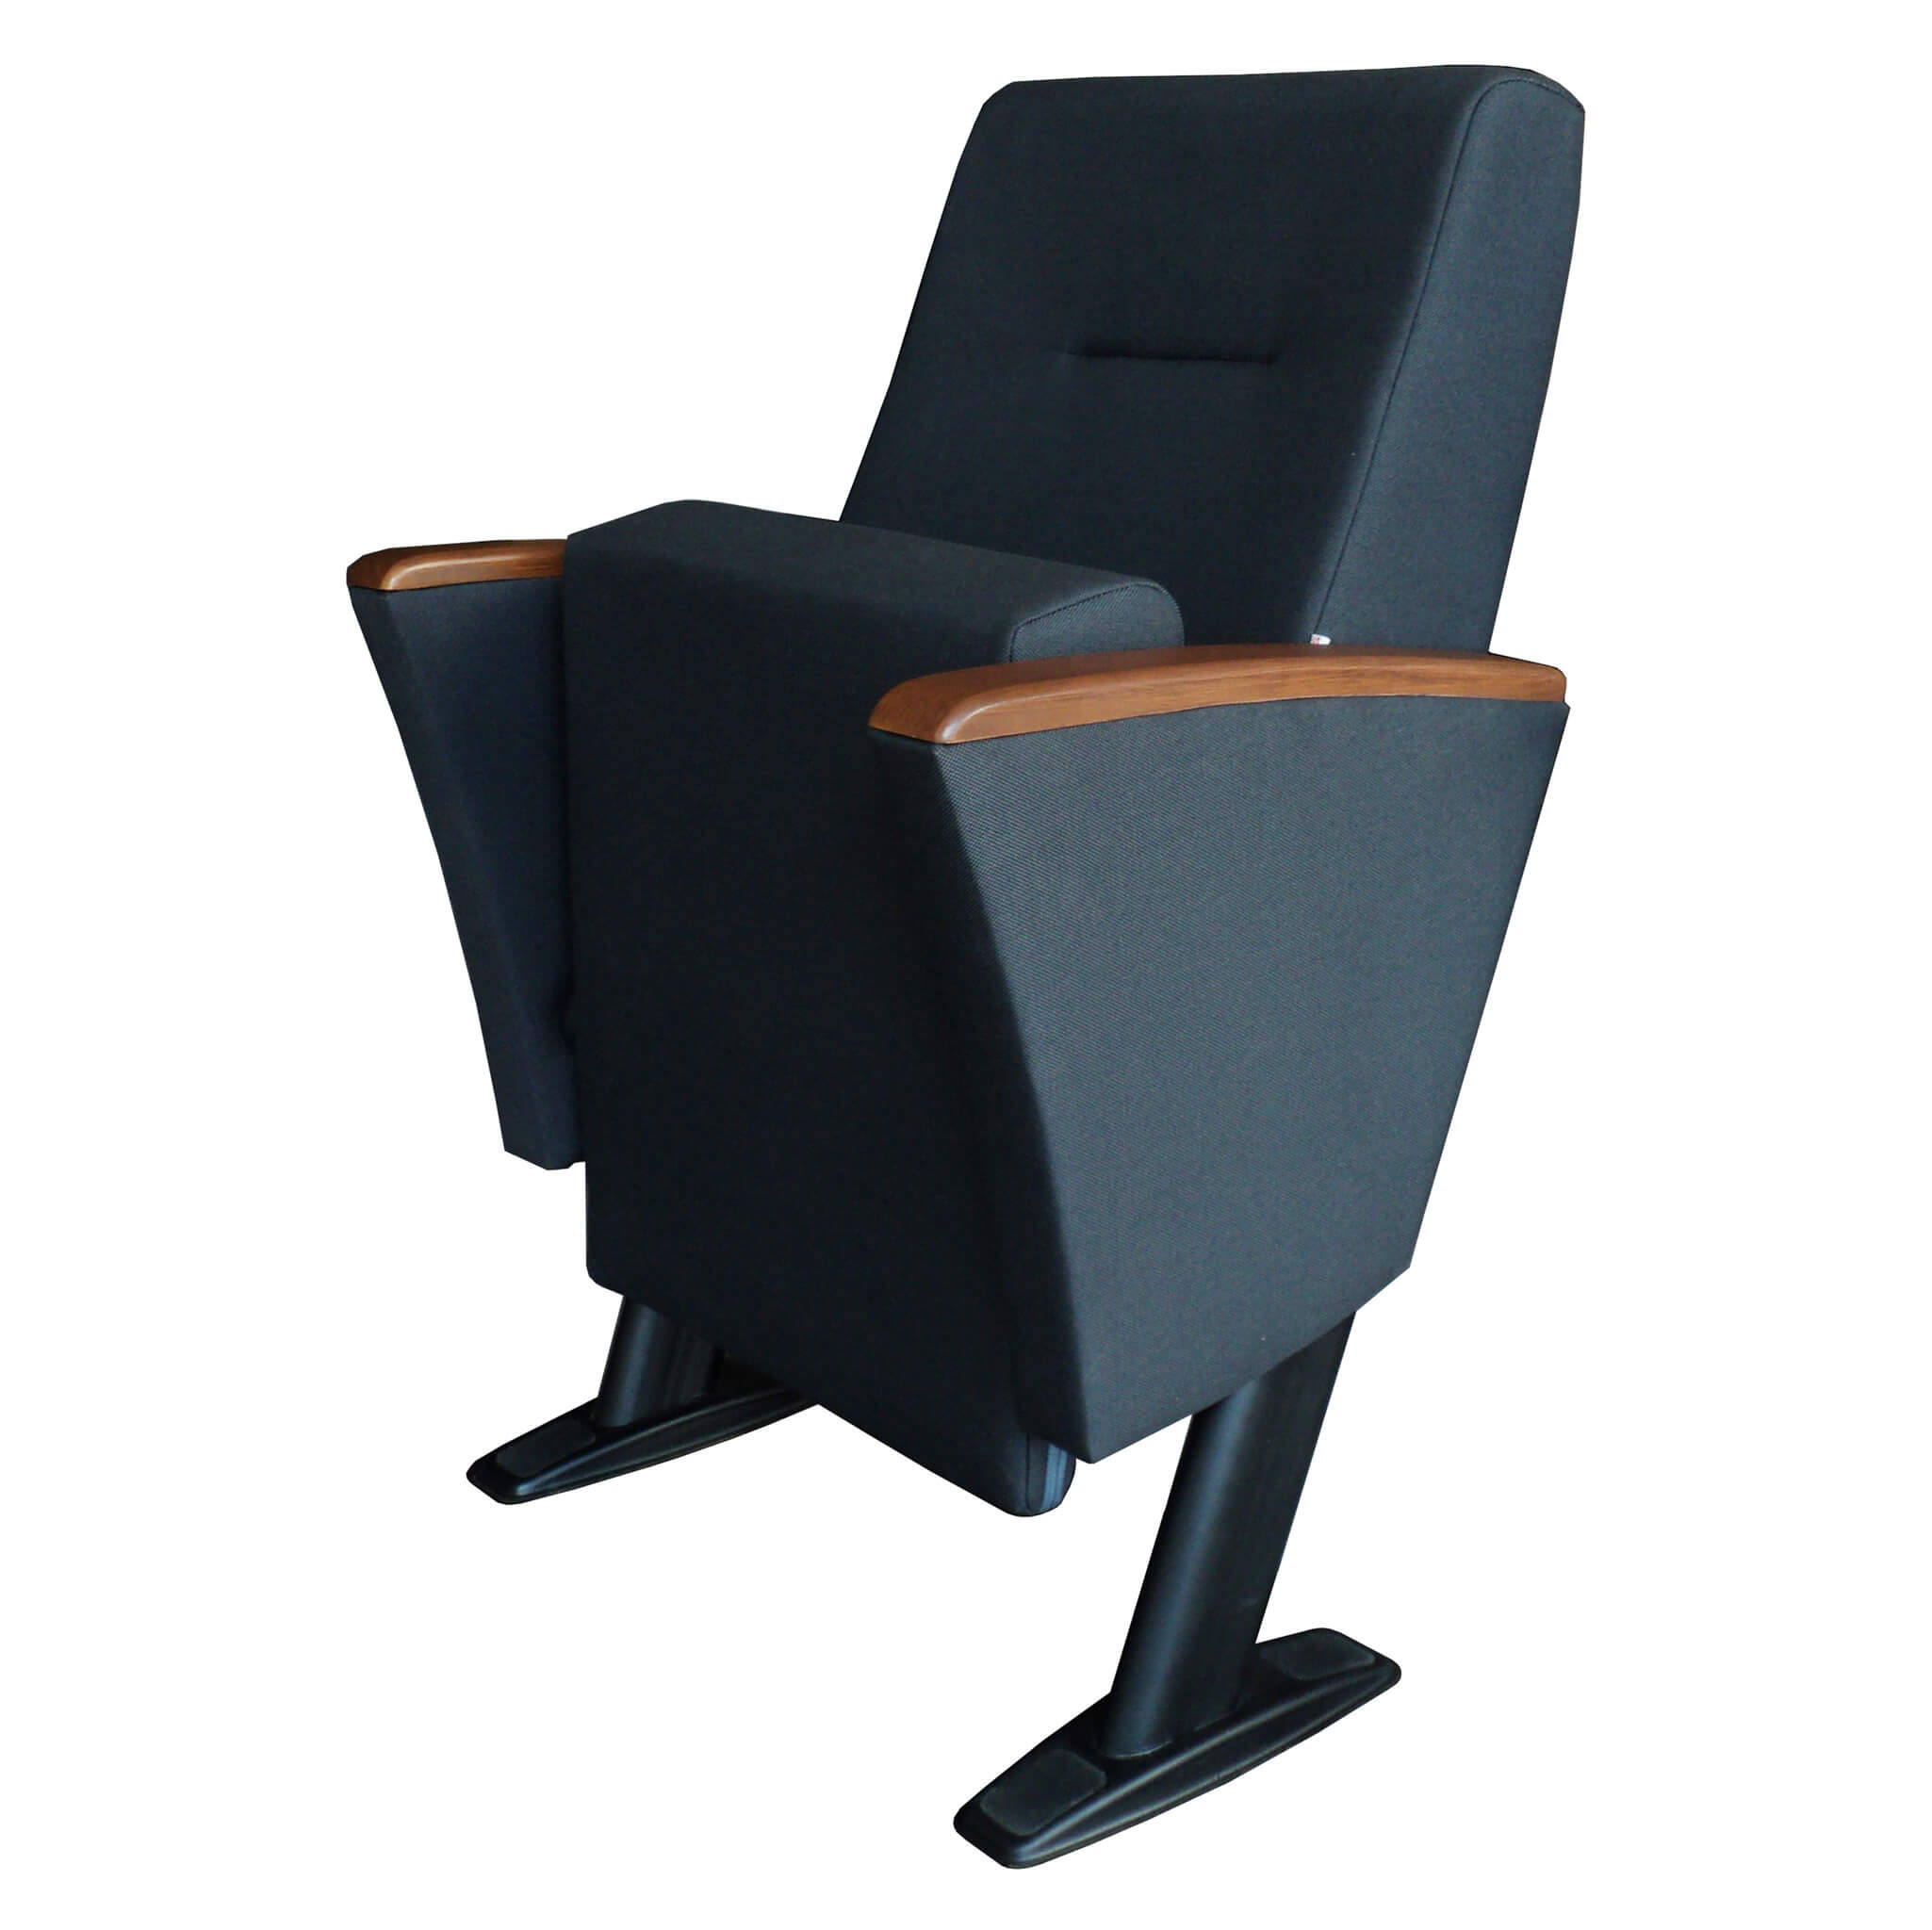 Akon Series - A40 Model - Auditorium, Theater Chair - Dimensions, Price